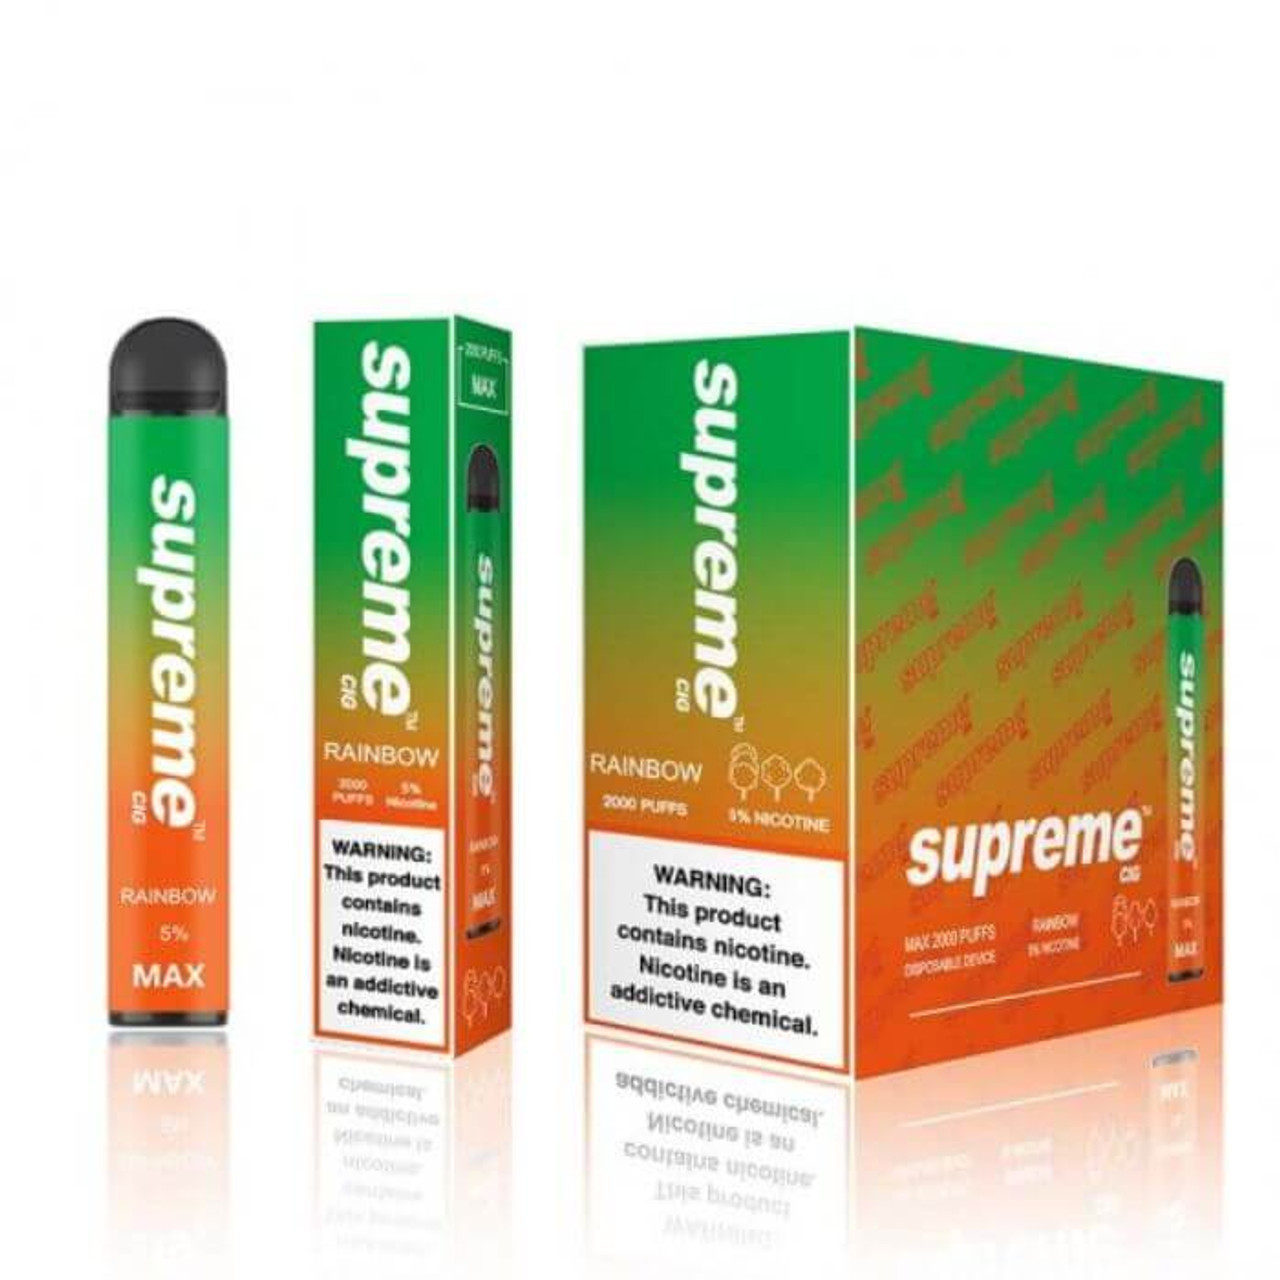 The Supreme Max Disposable Vape Device Experience